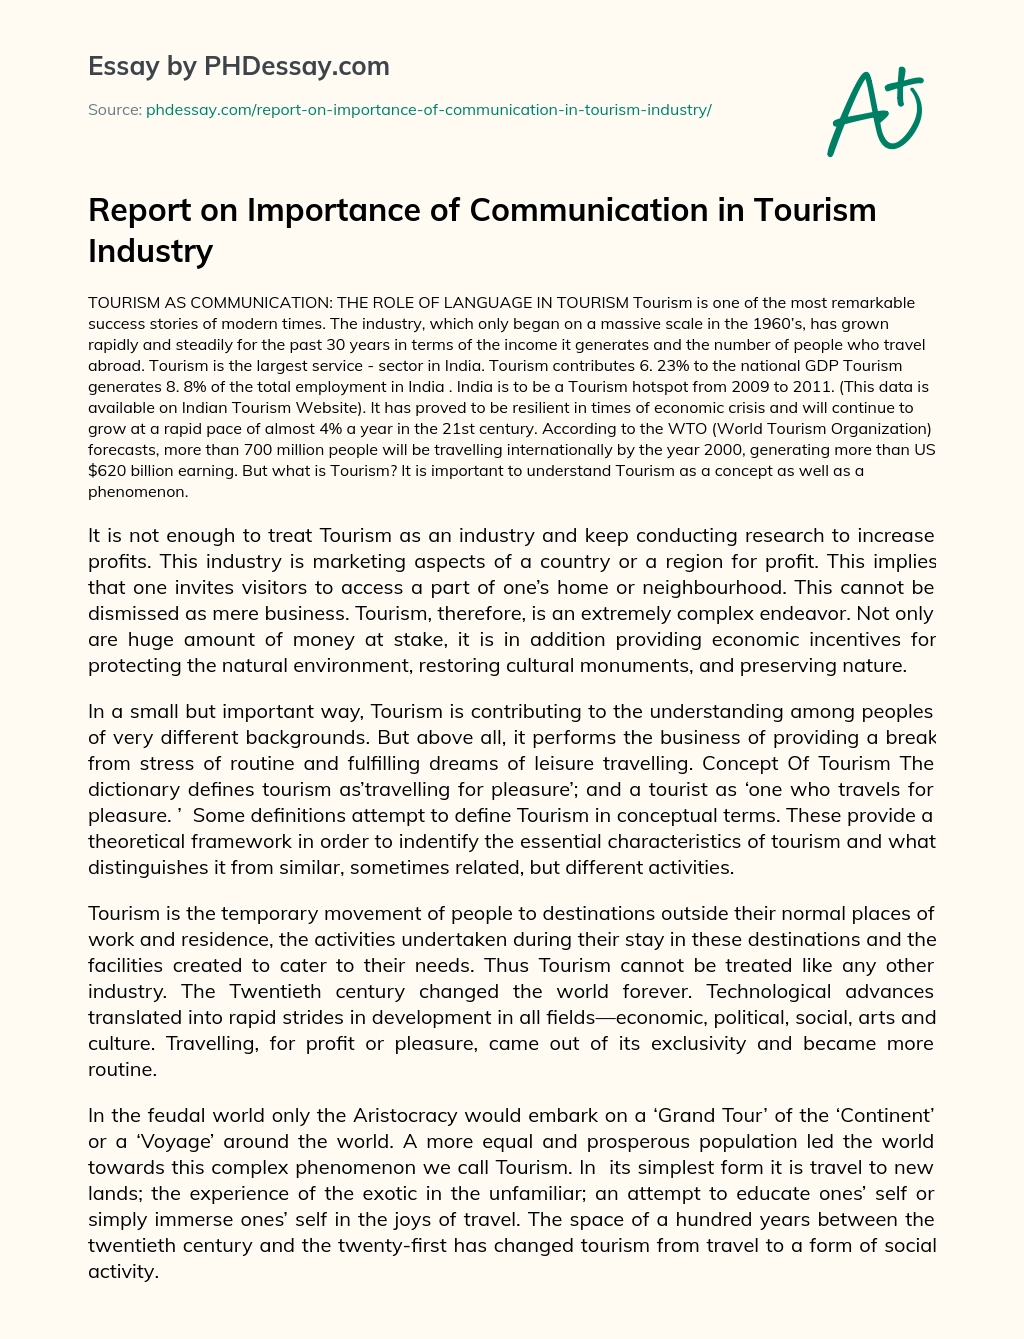 Report on Importance of Communication in Tourism Industry essay